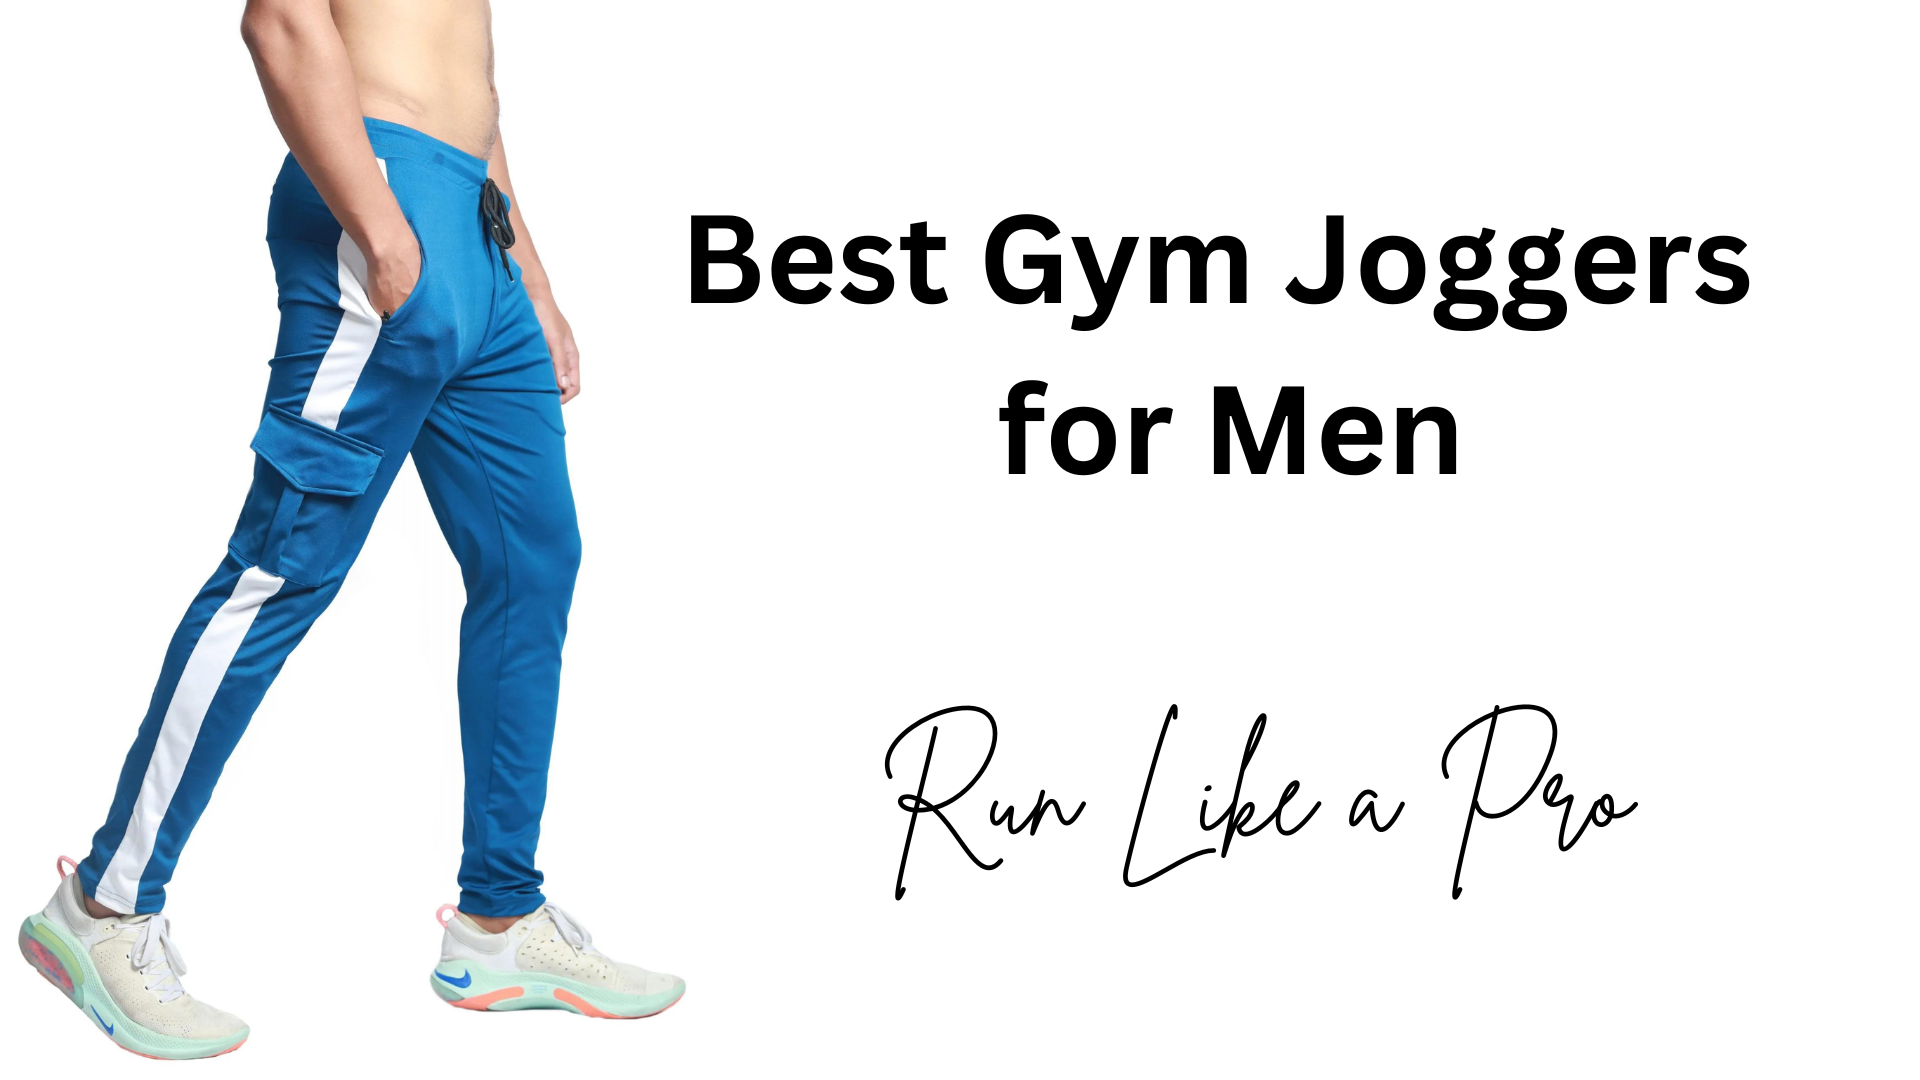 5 Best Gym Joggers for Men - Run Like a Pro